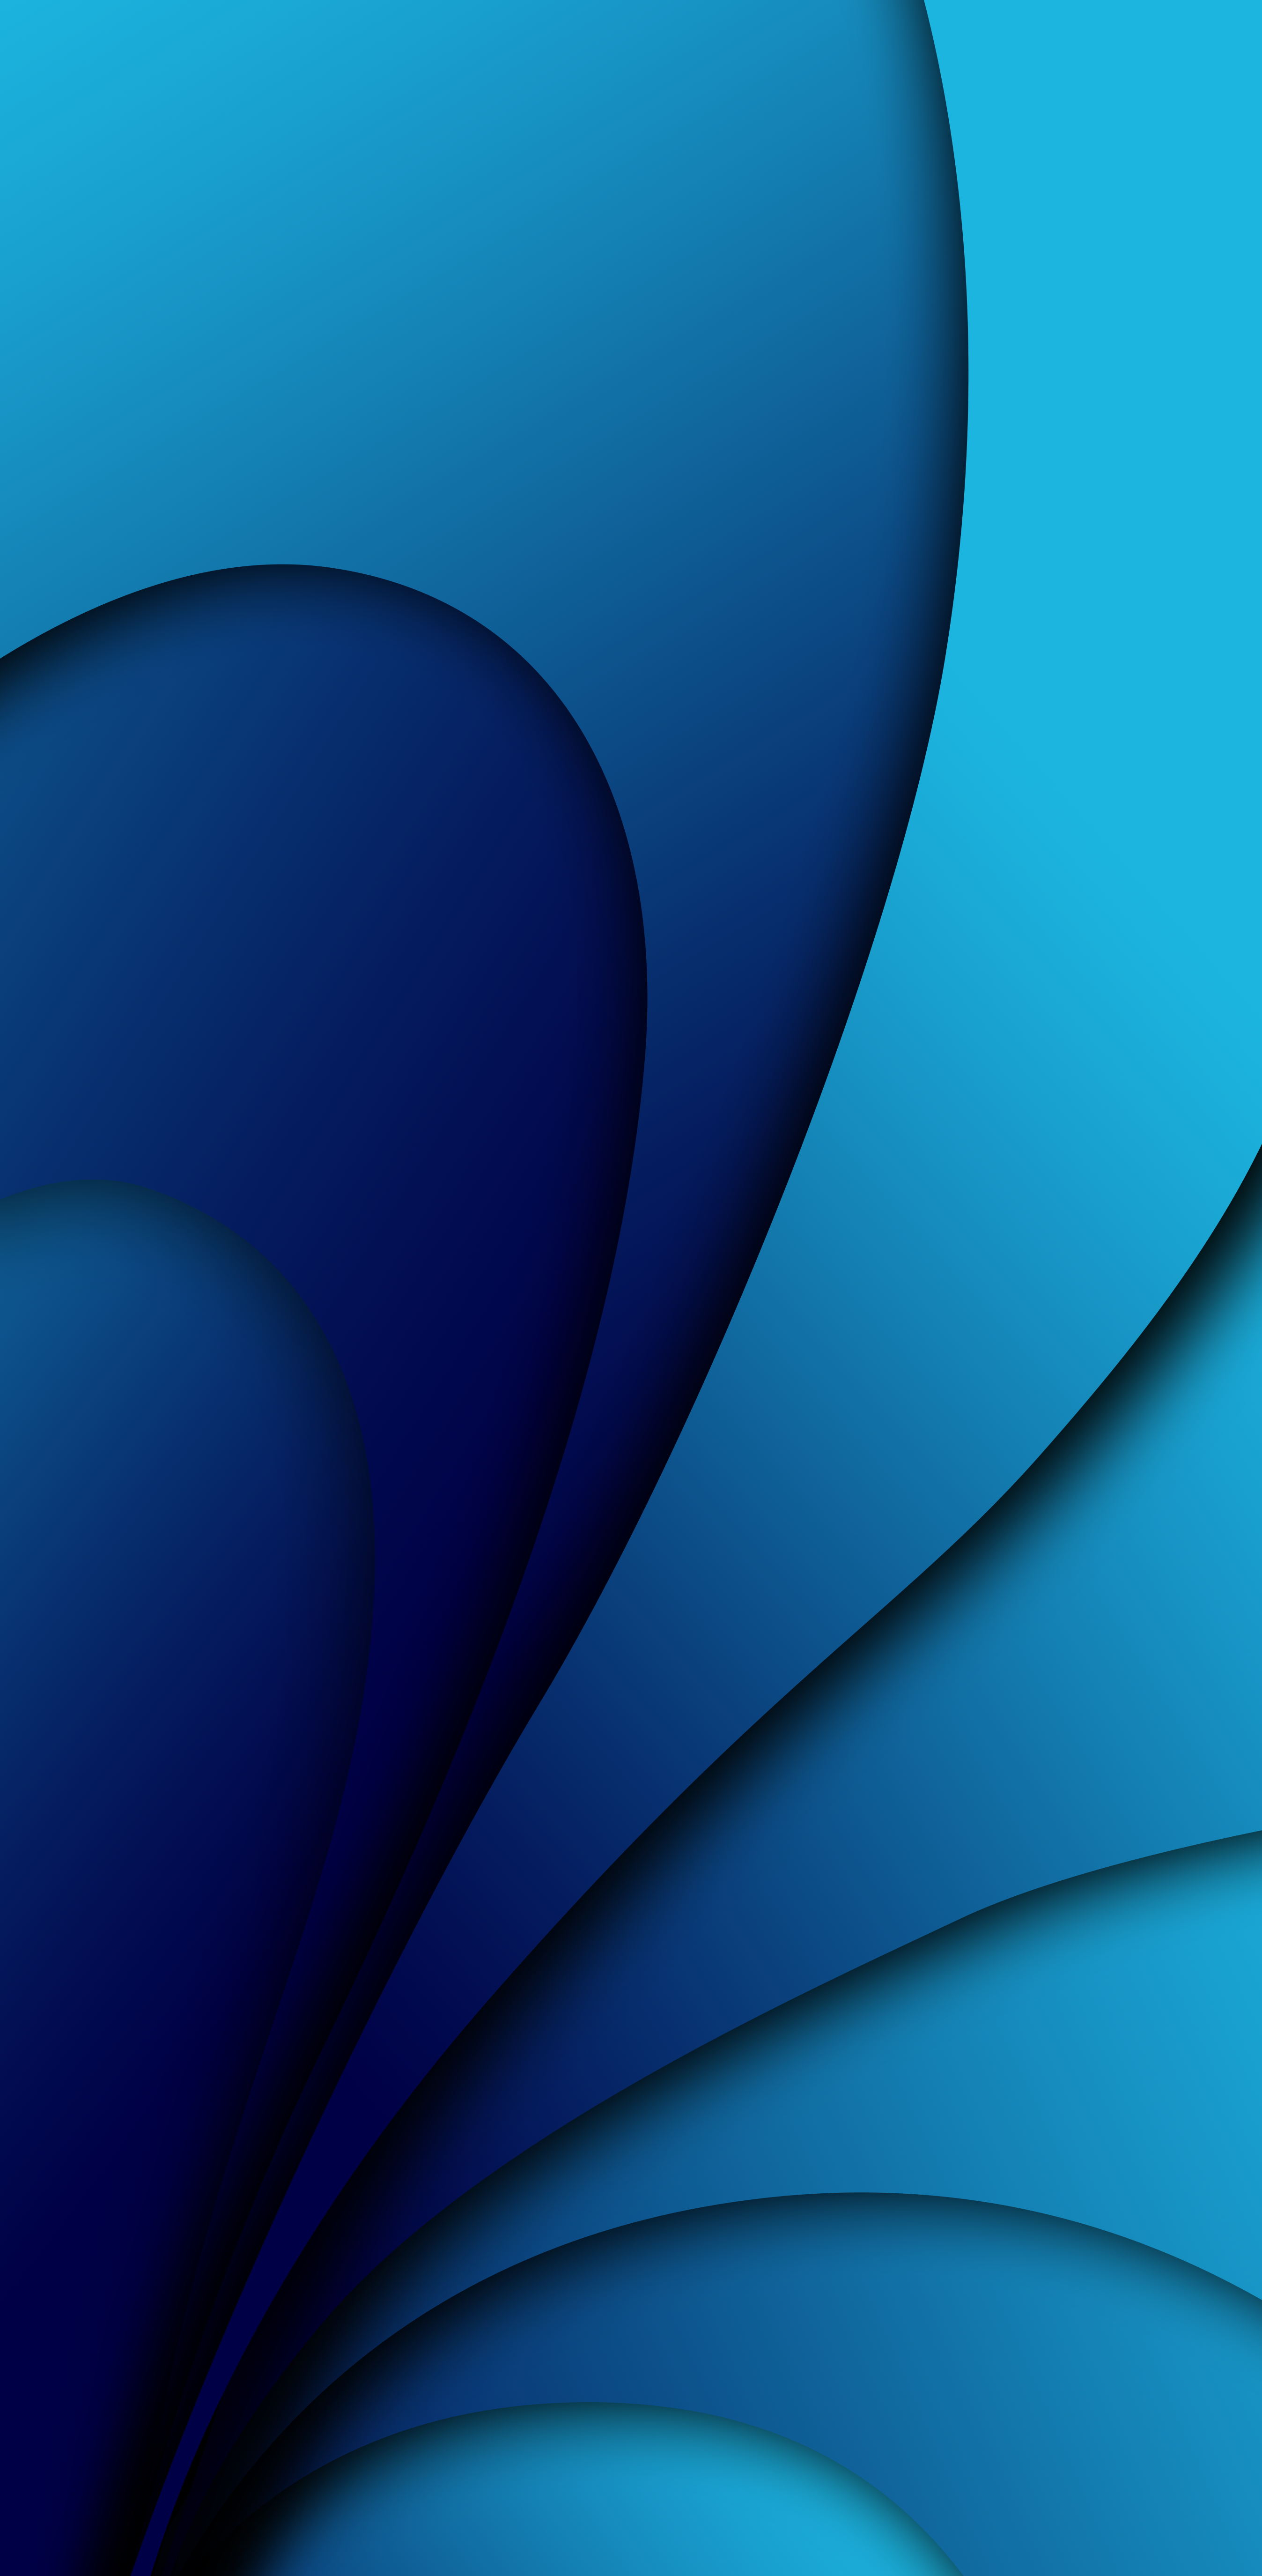 Ios Blue Spiral Gradient By Ongliong11 Background Image